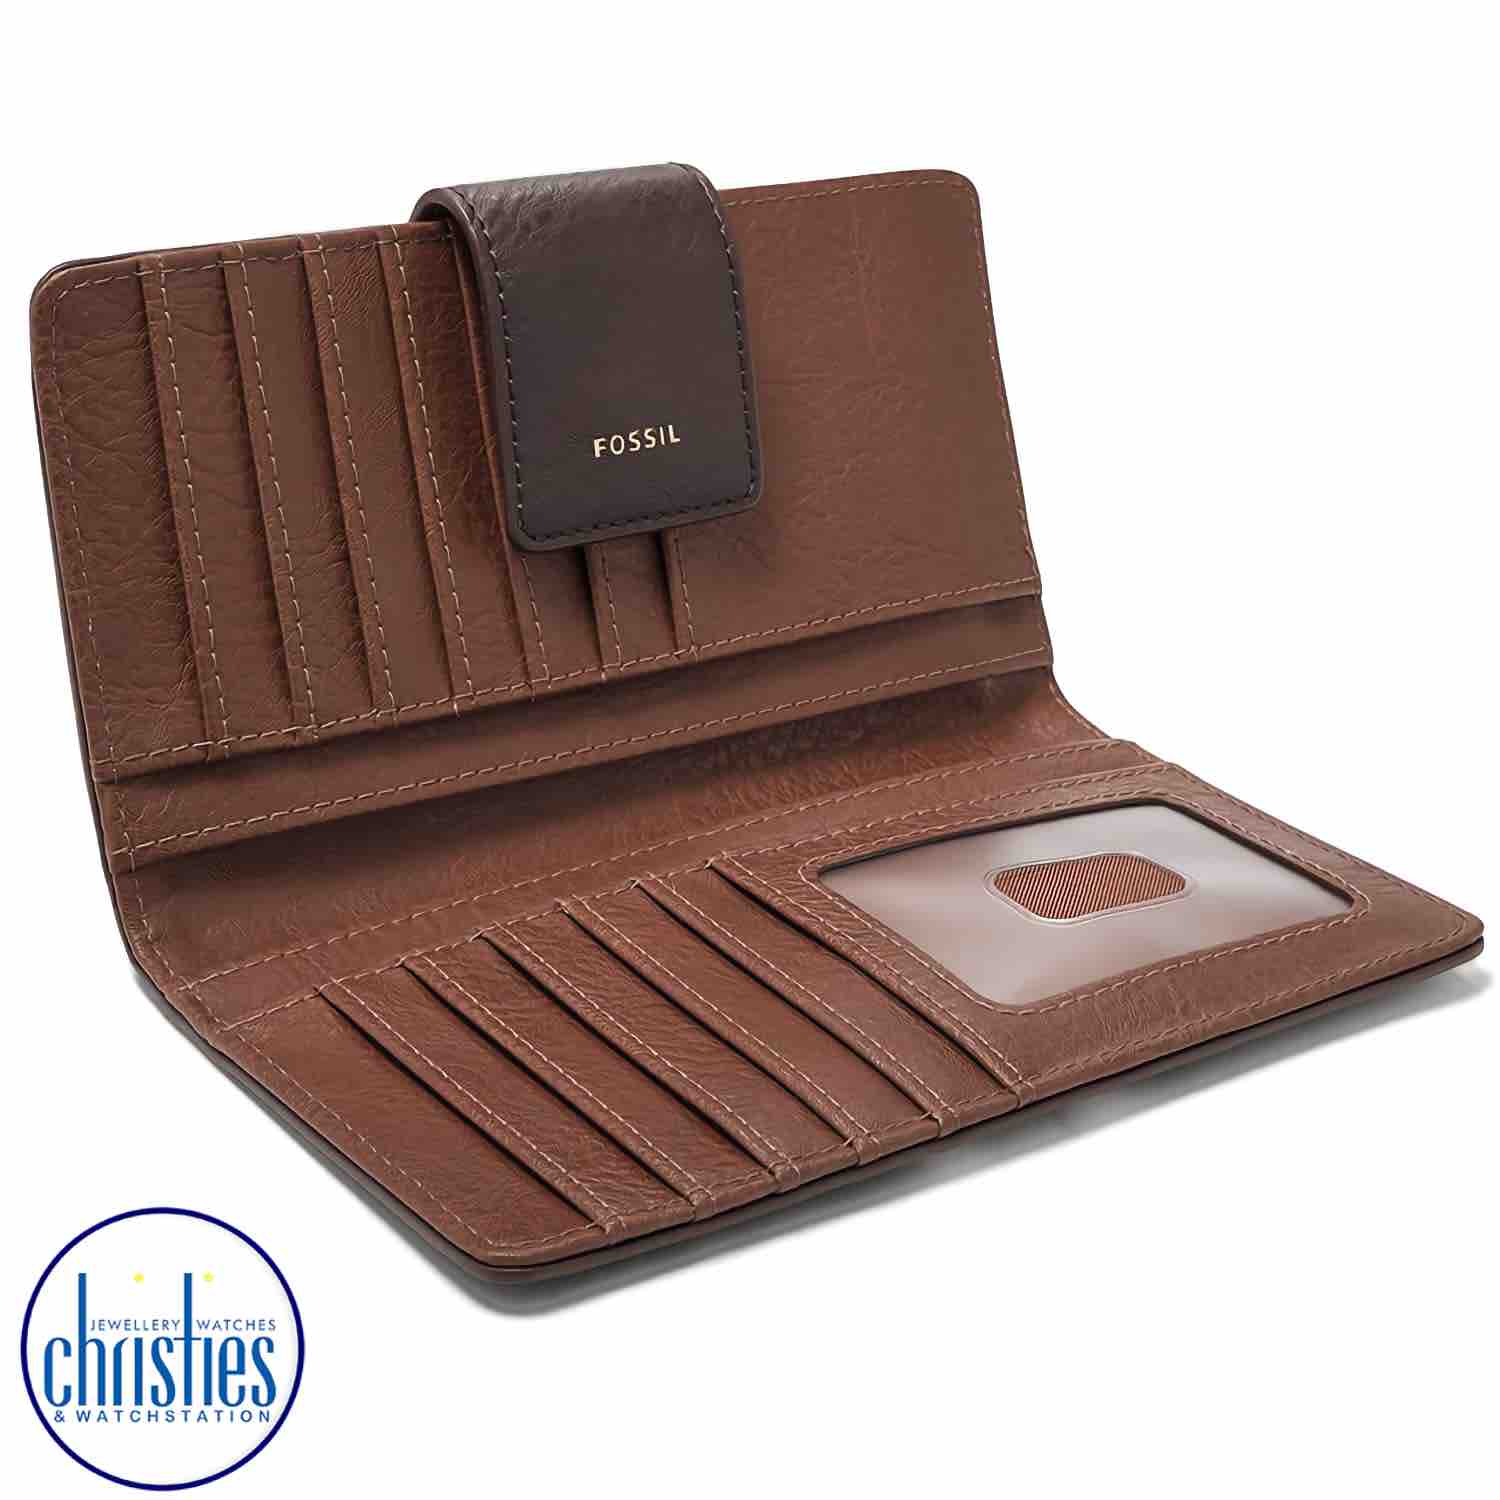 SL7827199 Fossil Logan RFID Tab Clutch. Fossil's  Fossil Logan Tab Clutch with RFID protectionAfterpay - Split your purchase into 4 instalments - Pay for your purchase over 4 instalments, due every two weeks.